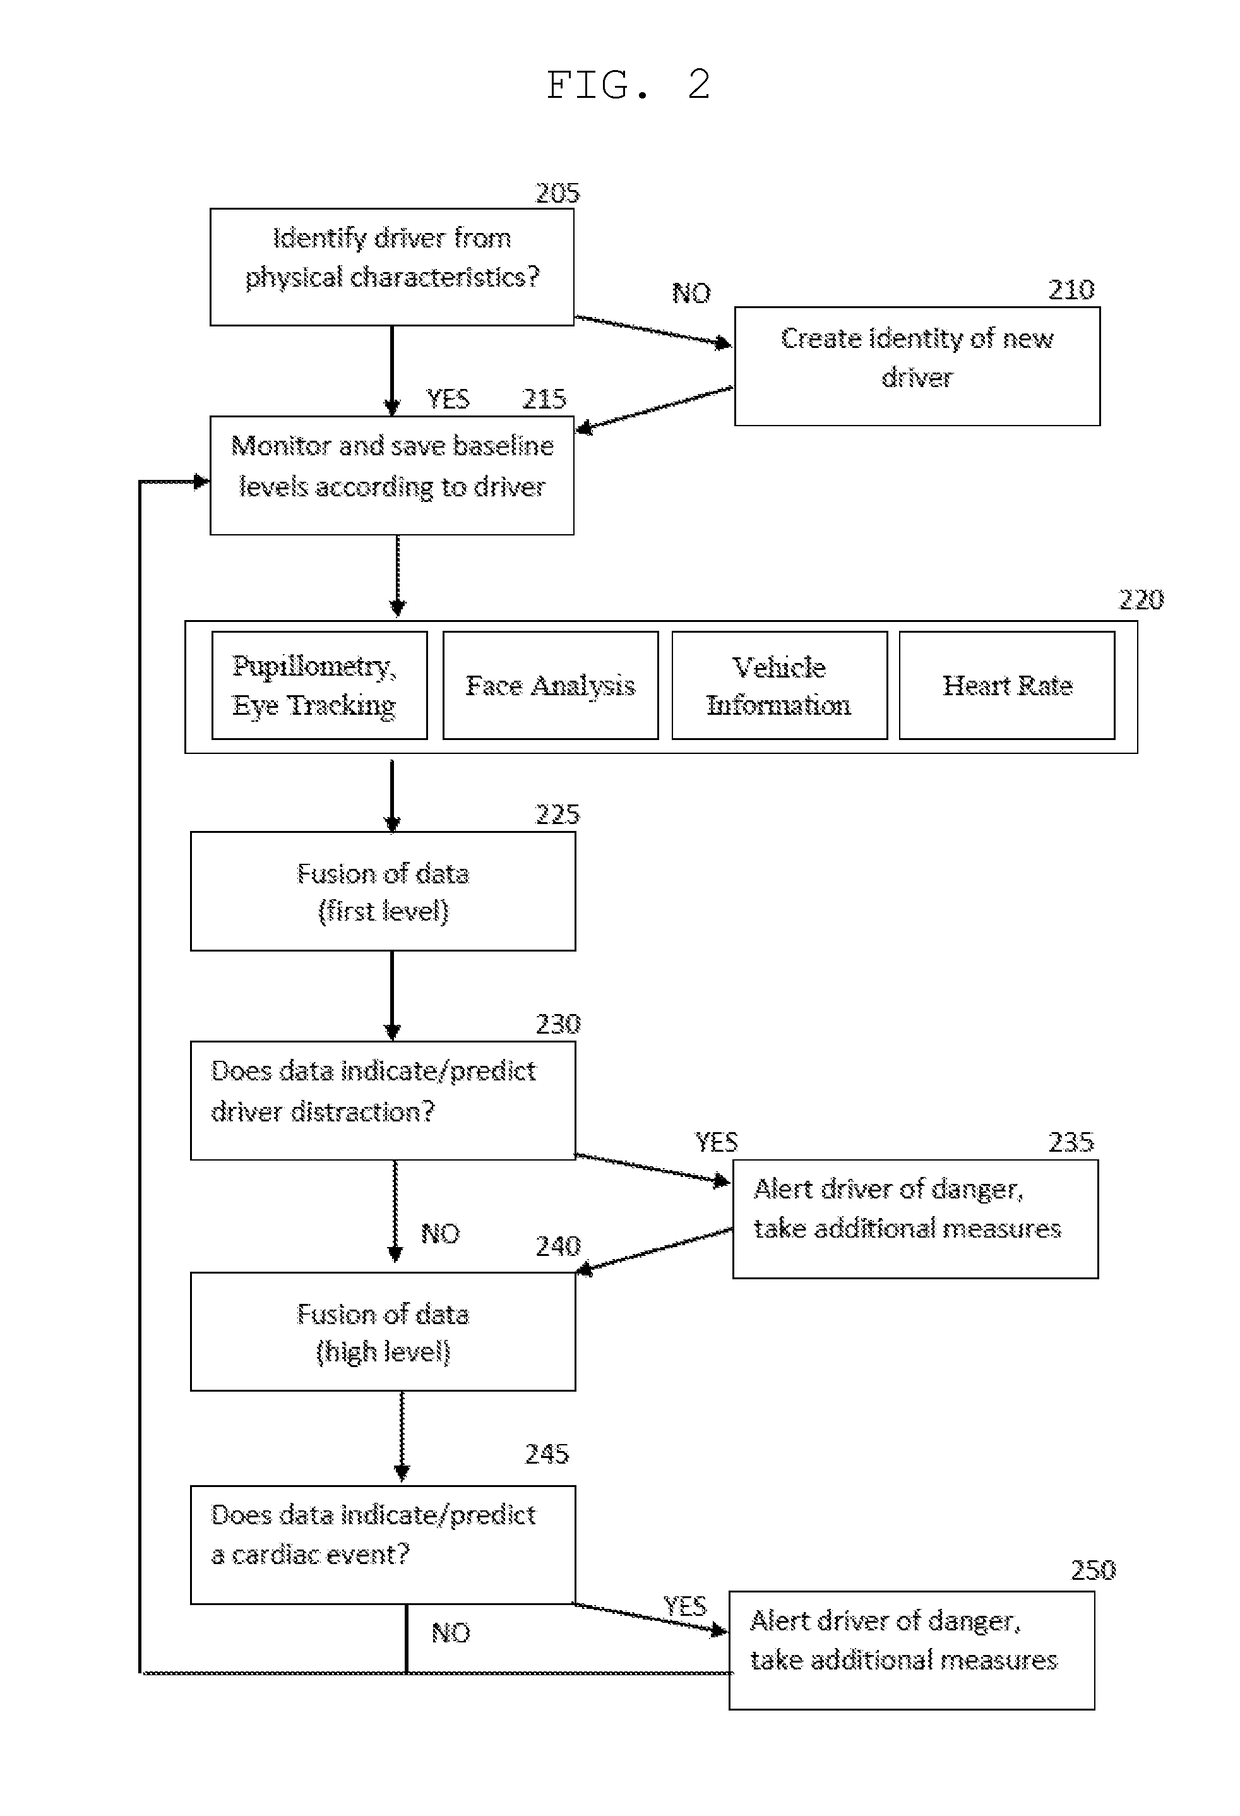 Pupillometry and sensor fusion for monitoring and predicting a vehicle operator's condition